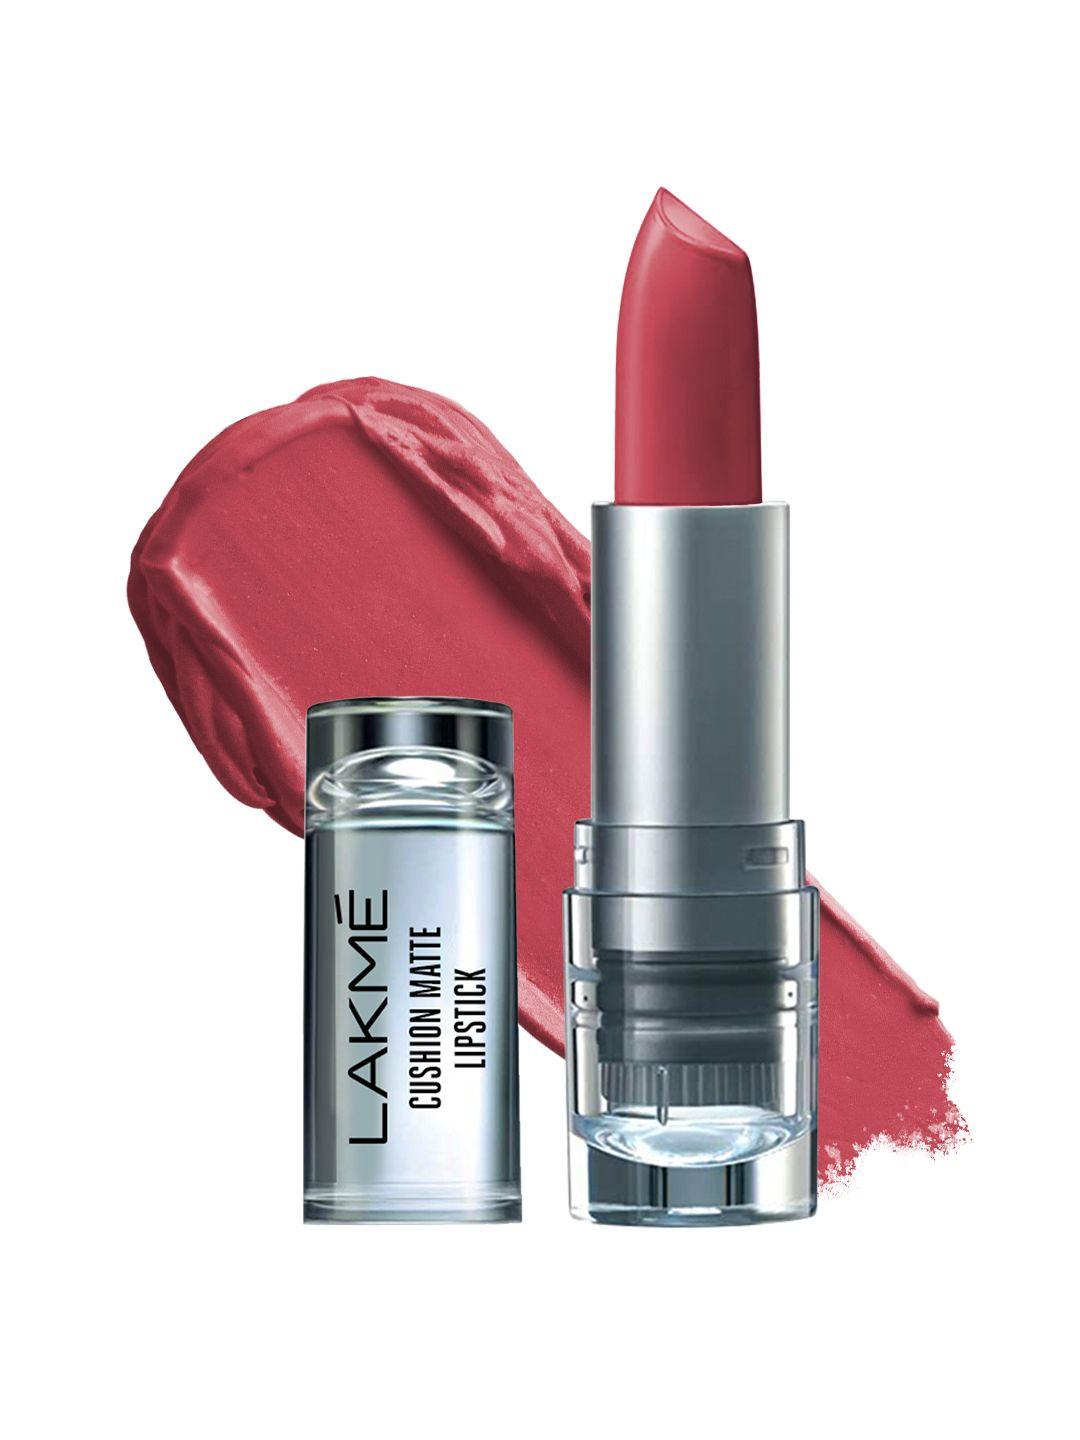 Lakme Cushion Matte Long Lasting Lipstick with French Rose Oil - Mauve Spice